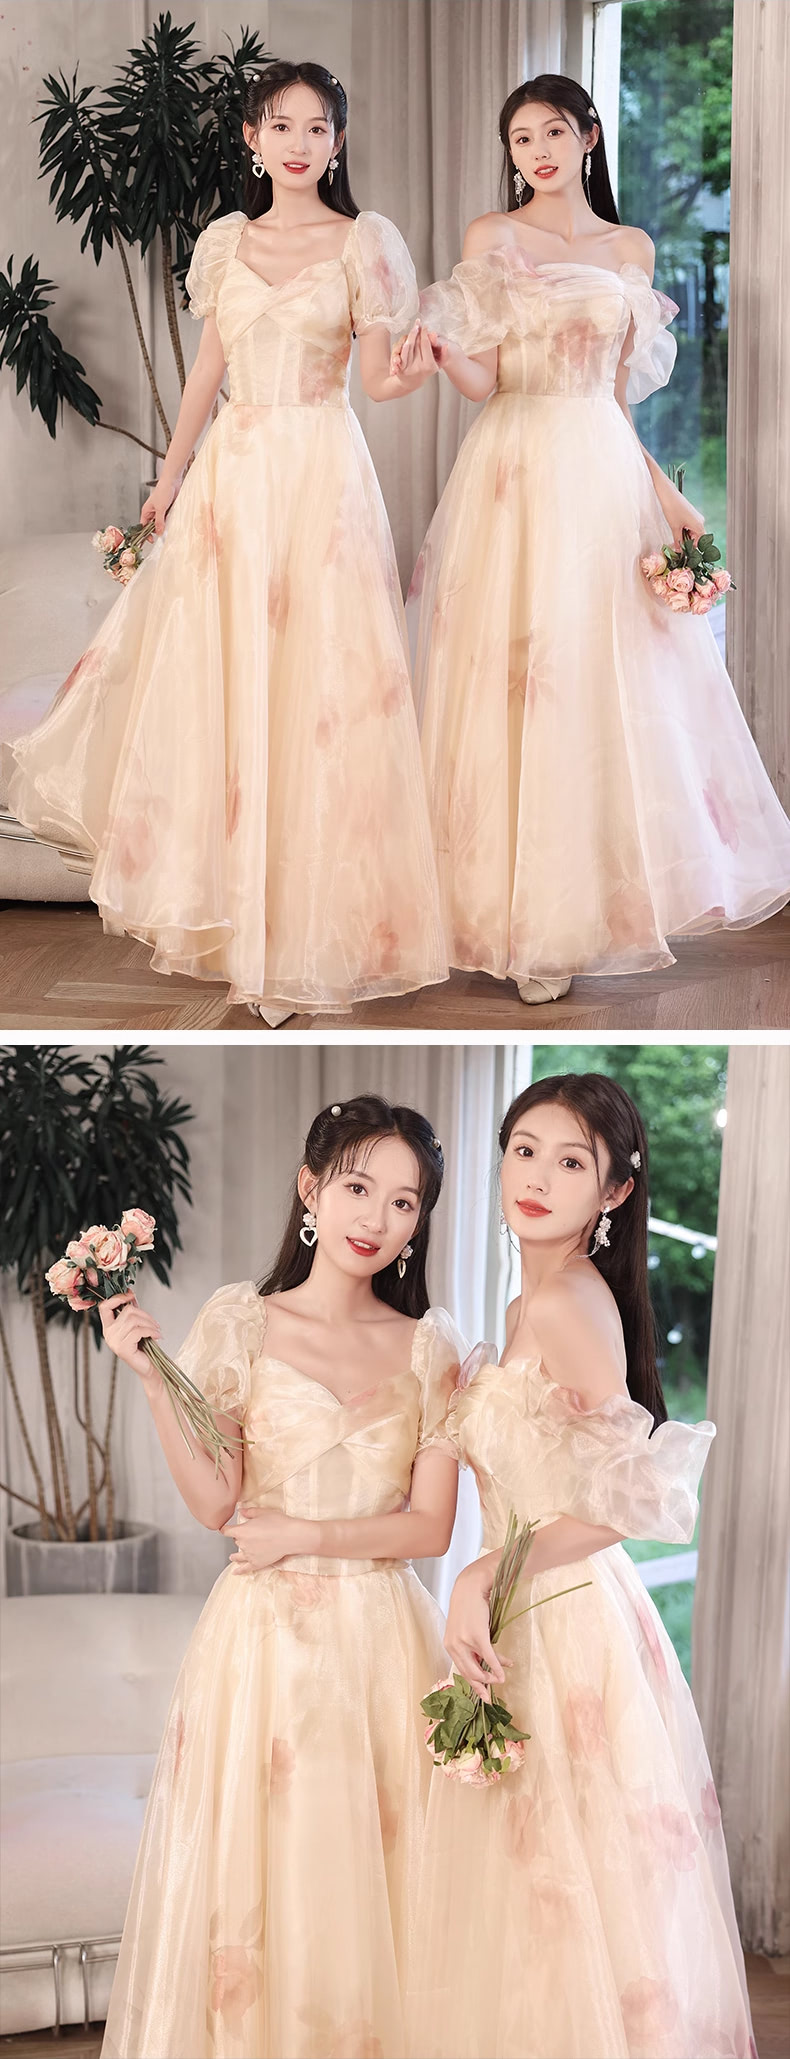 Charming-Tulle-Bridesmaid-Dress-Sweet-Wedding-Party-Evening-Gown13